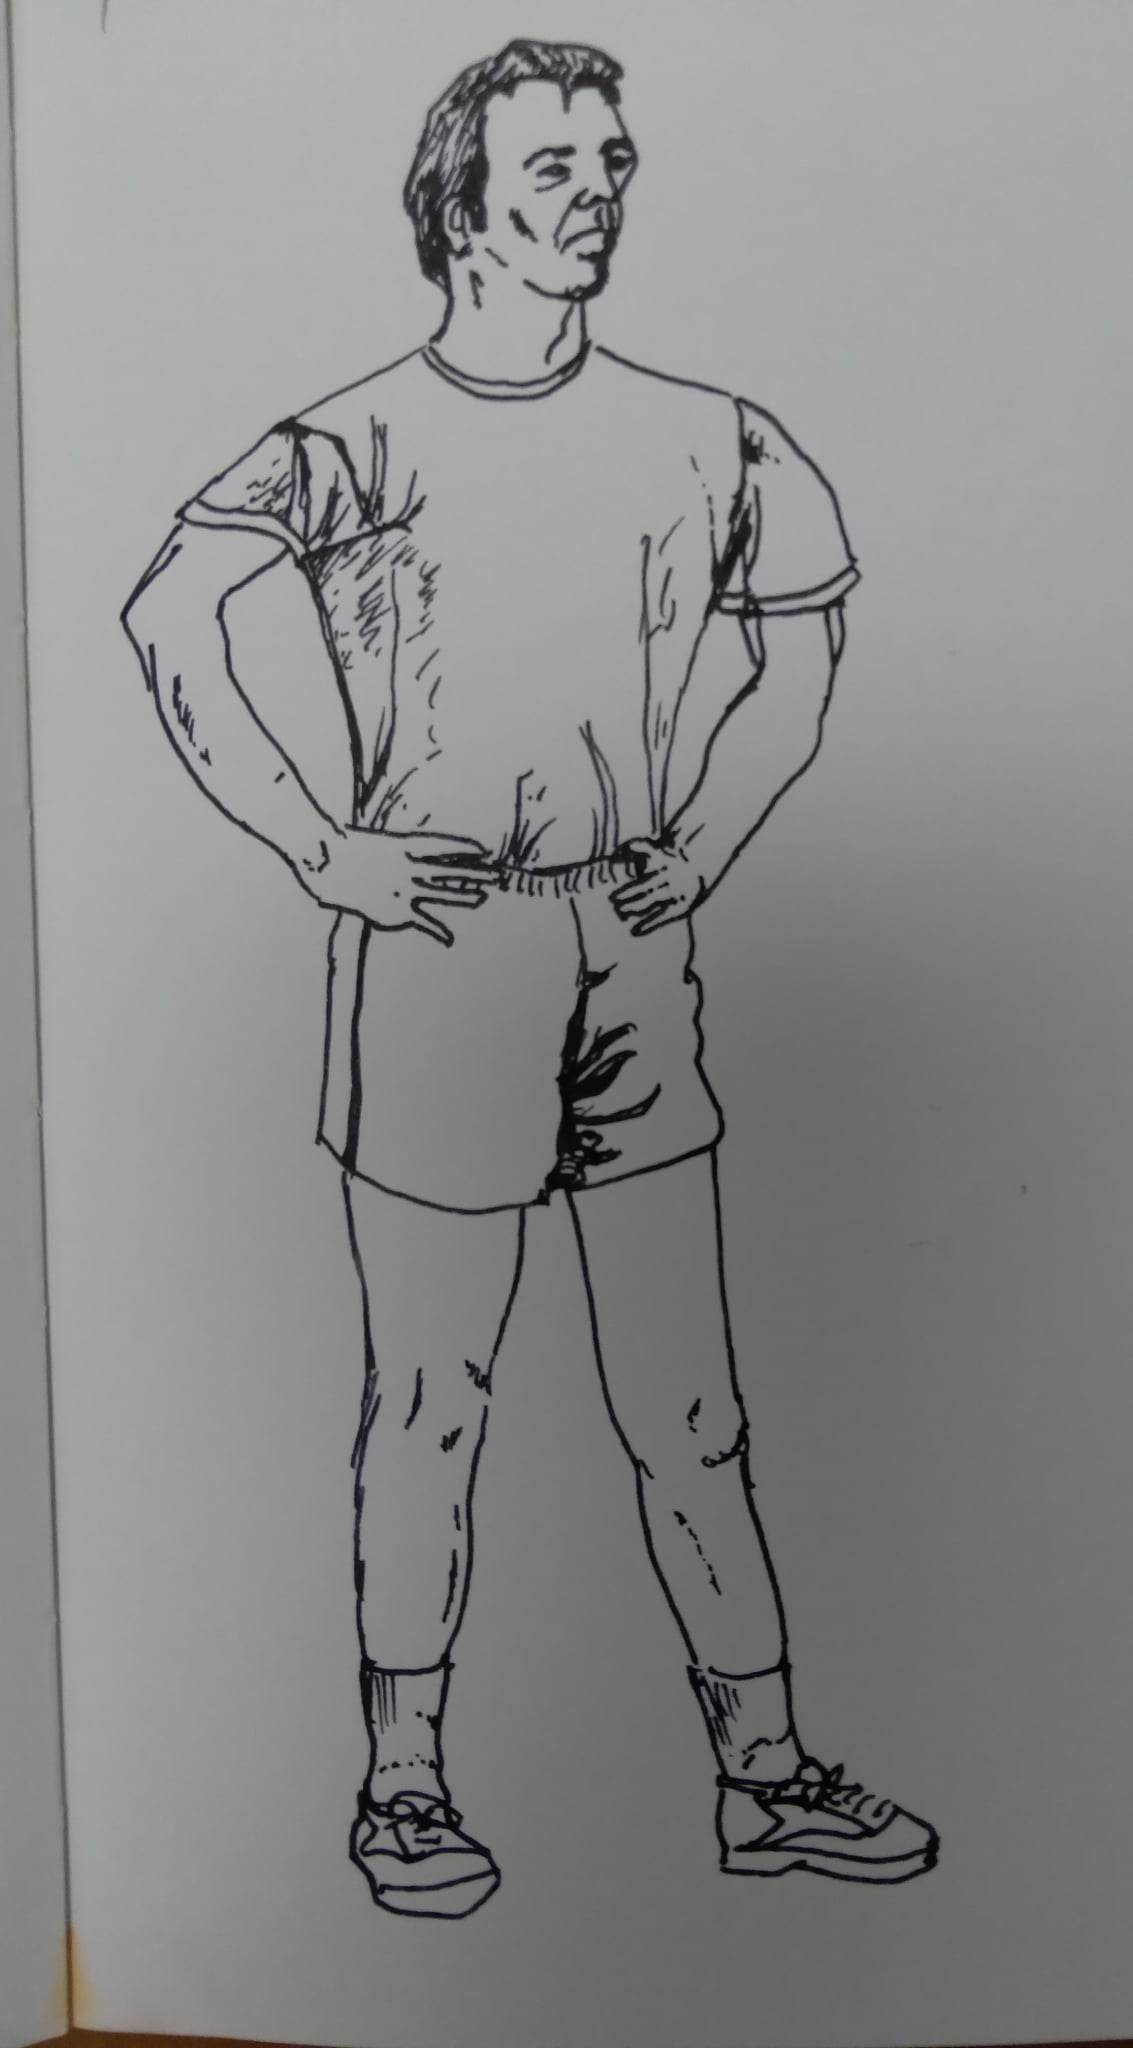 Drawing of an athletic man in shorts